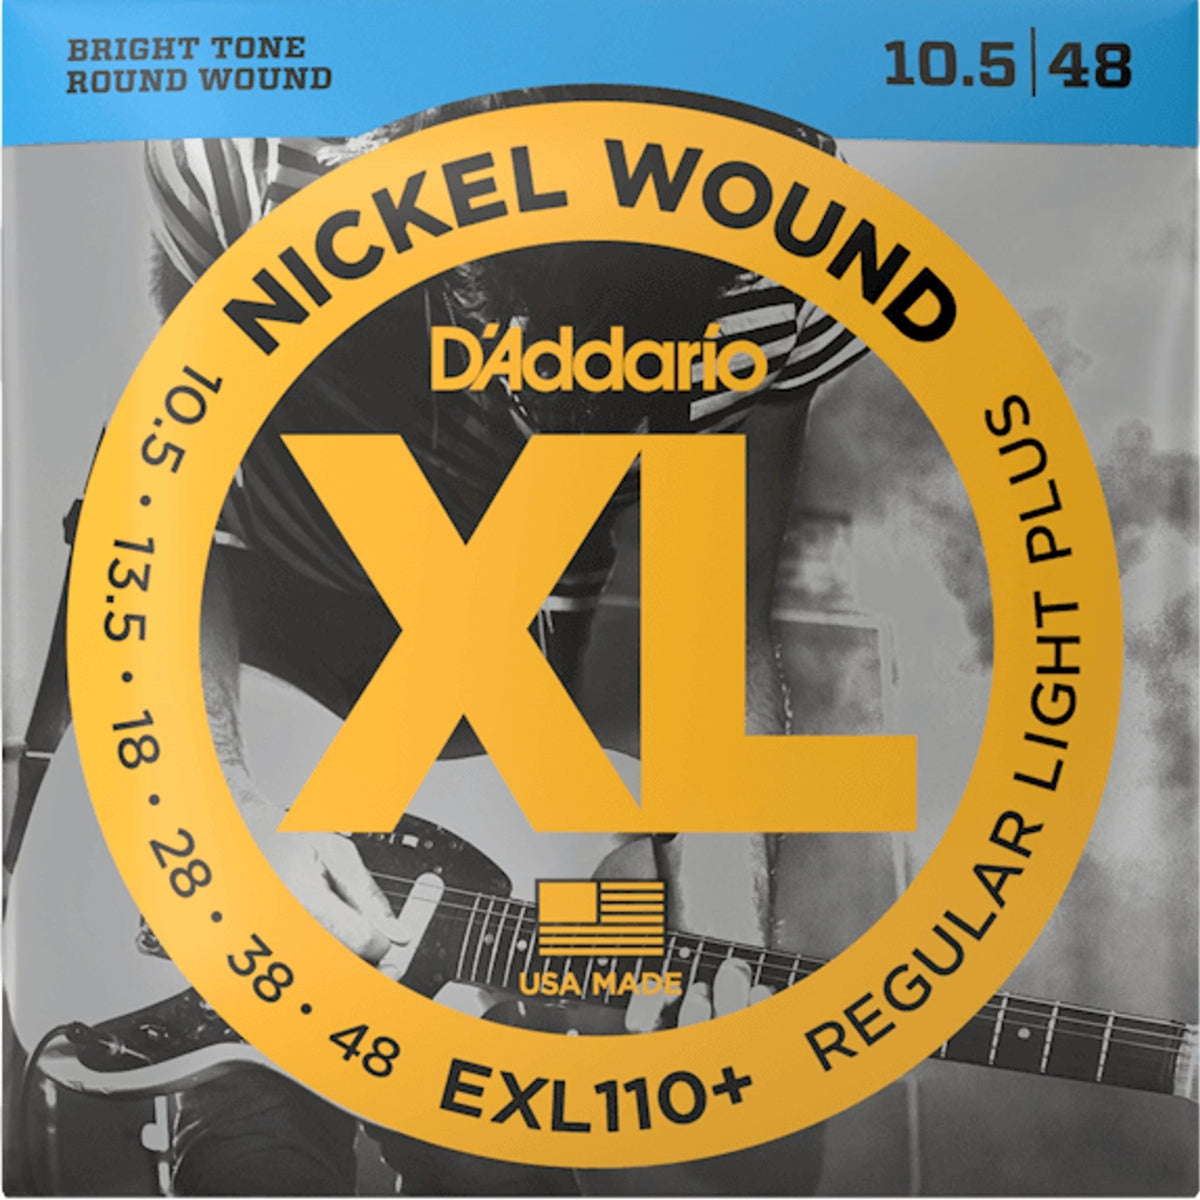 EXL110+, with its 10.5 gauge high E, is the ideal &quot;step up&quot; string set for players who are moving up from 10 to 11 gauge sets. Additionally, it&#39;s great for balancing tension between various scale length guitars